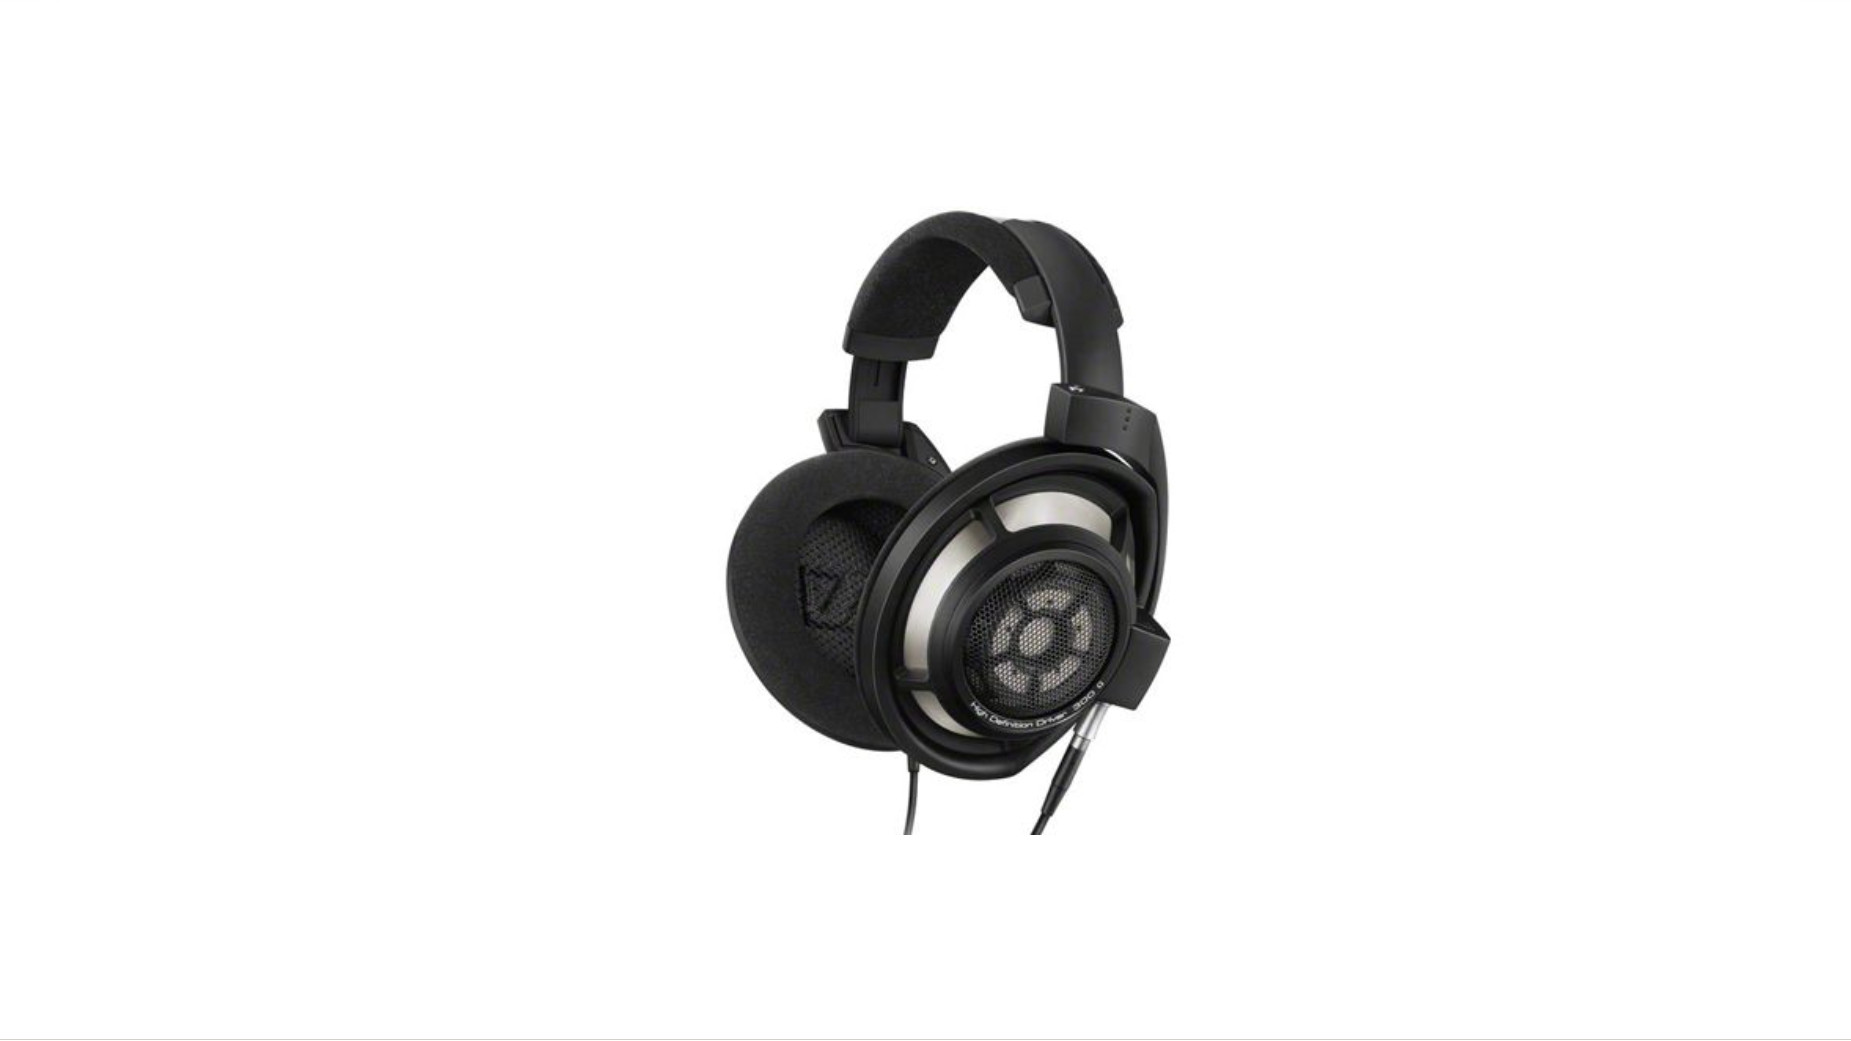 Sennheiser HD 800S review of very well professional headphones that can be used for audio engineering